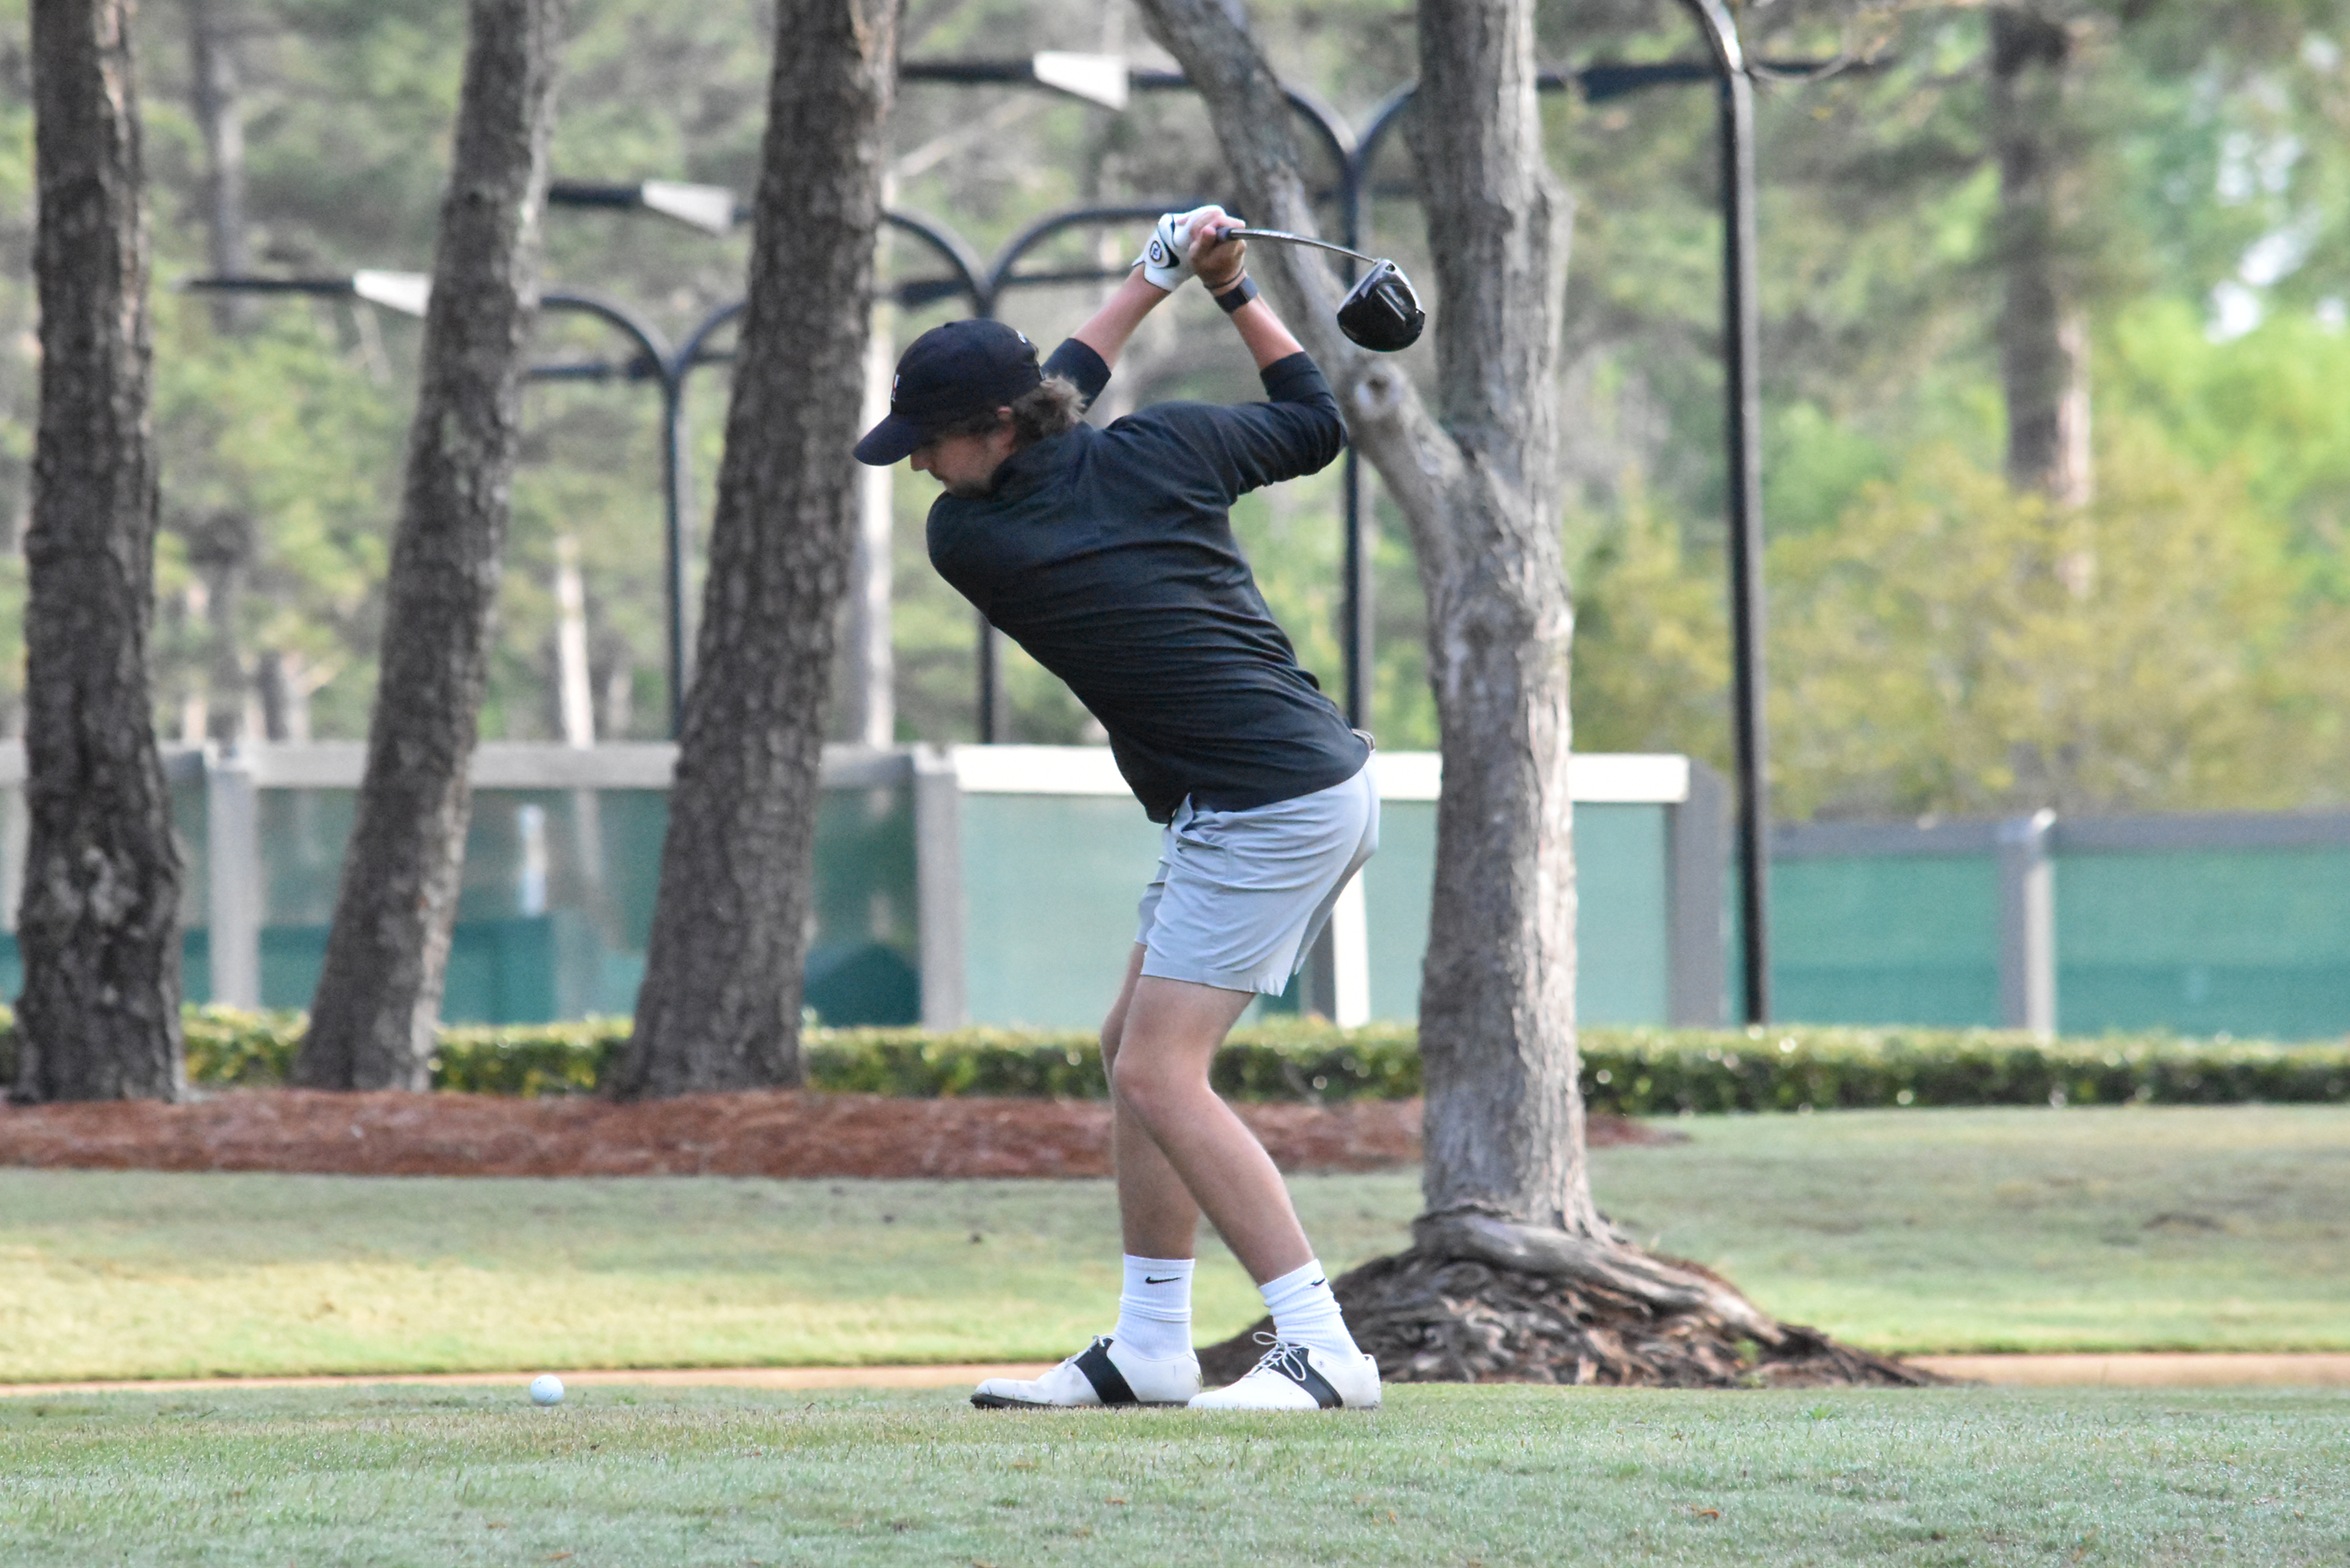 Hawks Take on Day One of the NCAA Golf Championship